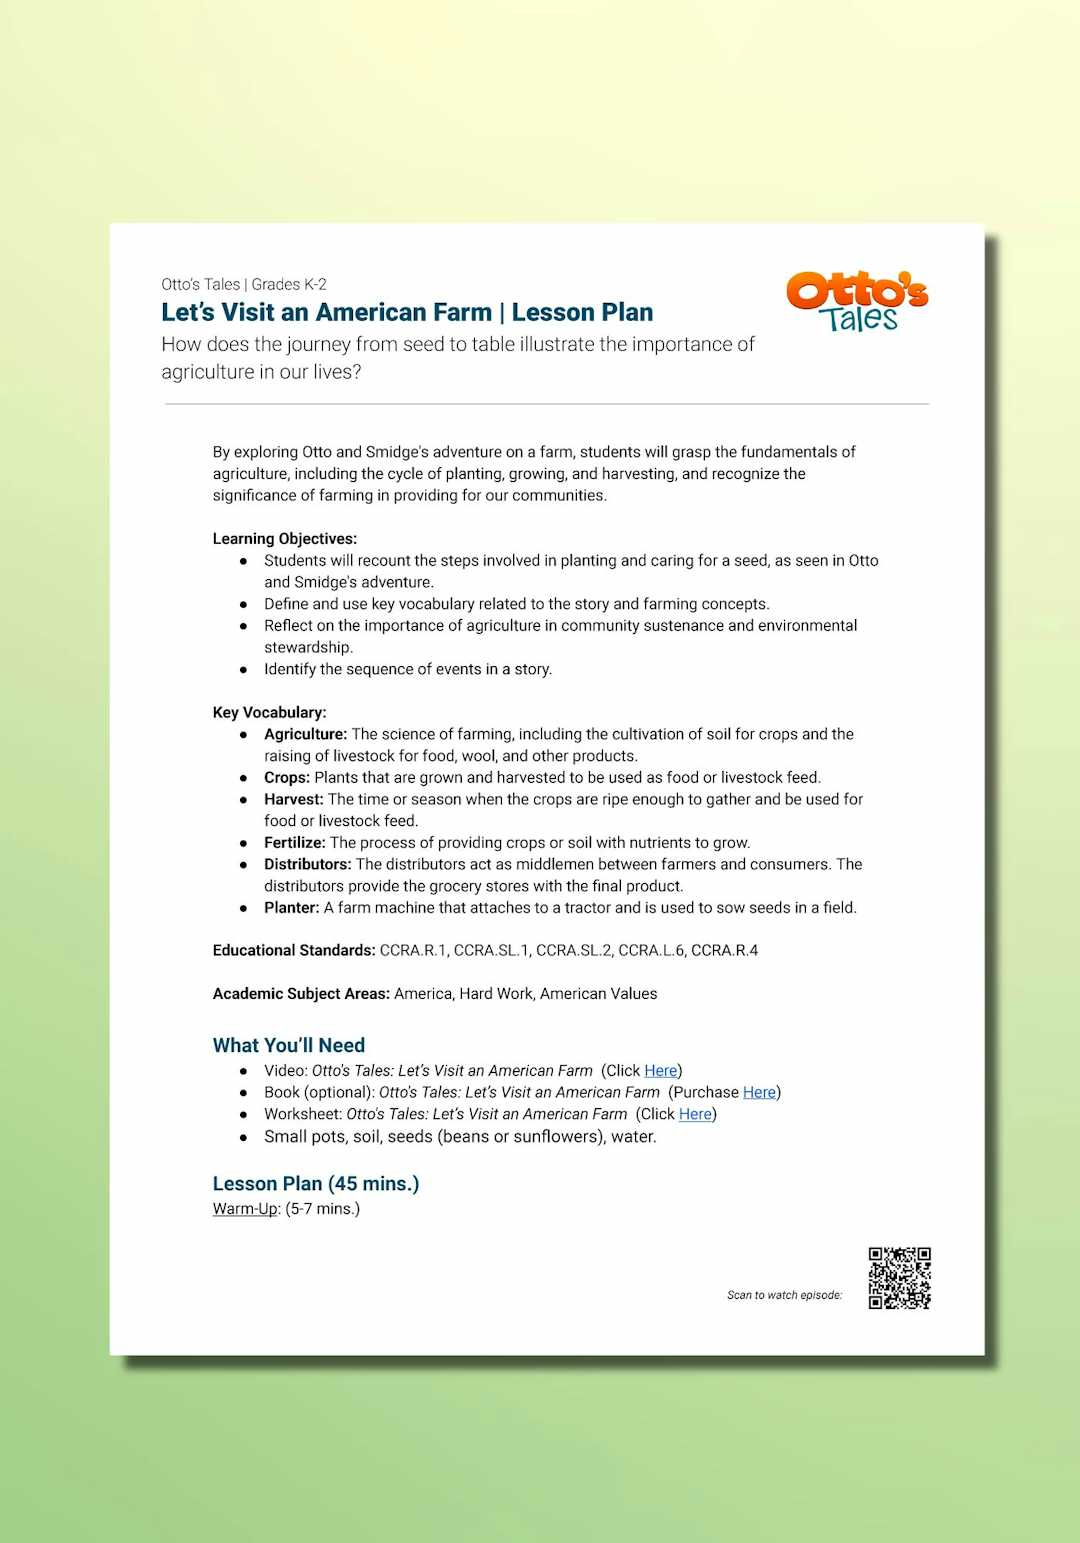 "Otto's Tales: Let's Visit an American Farm" Lesson Plan